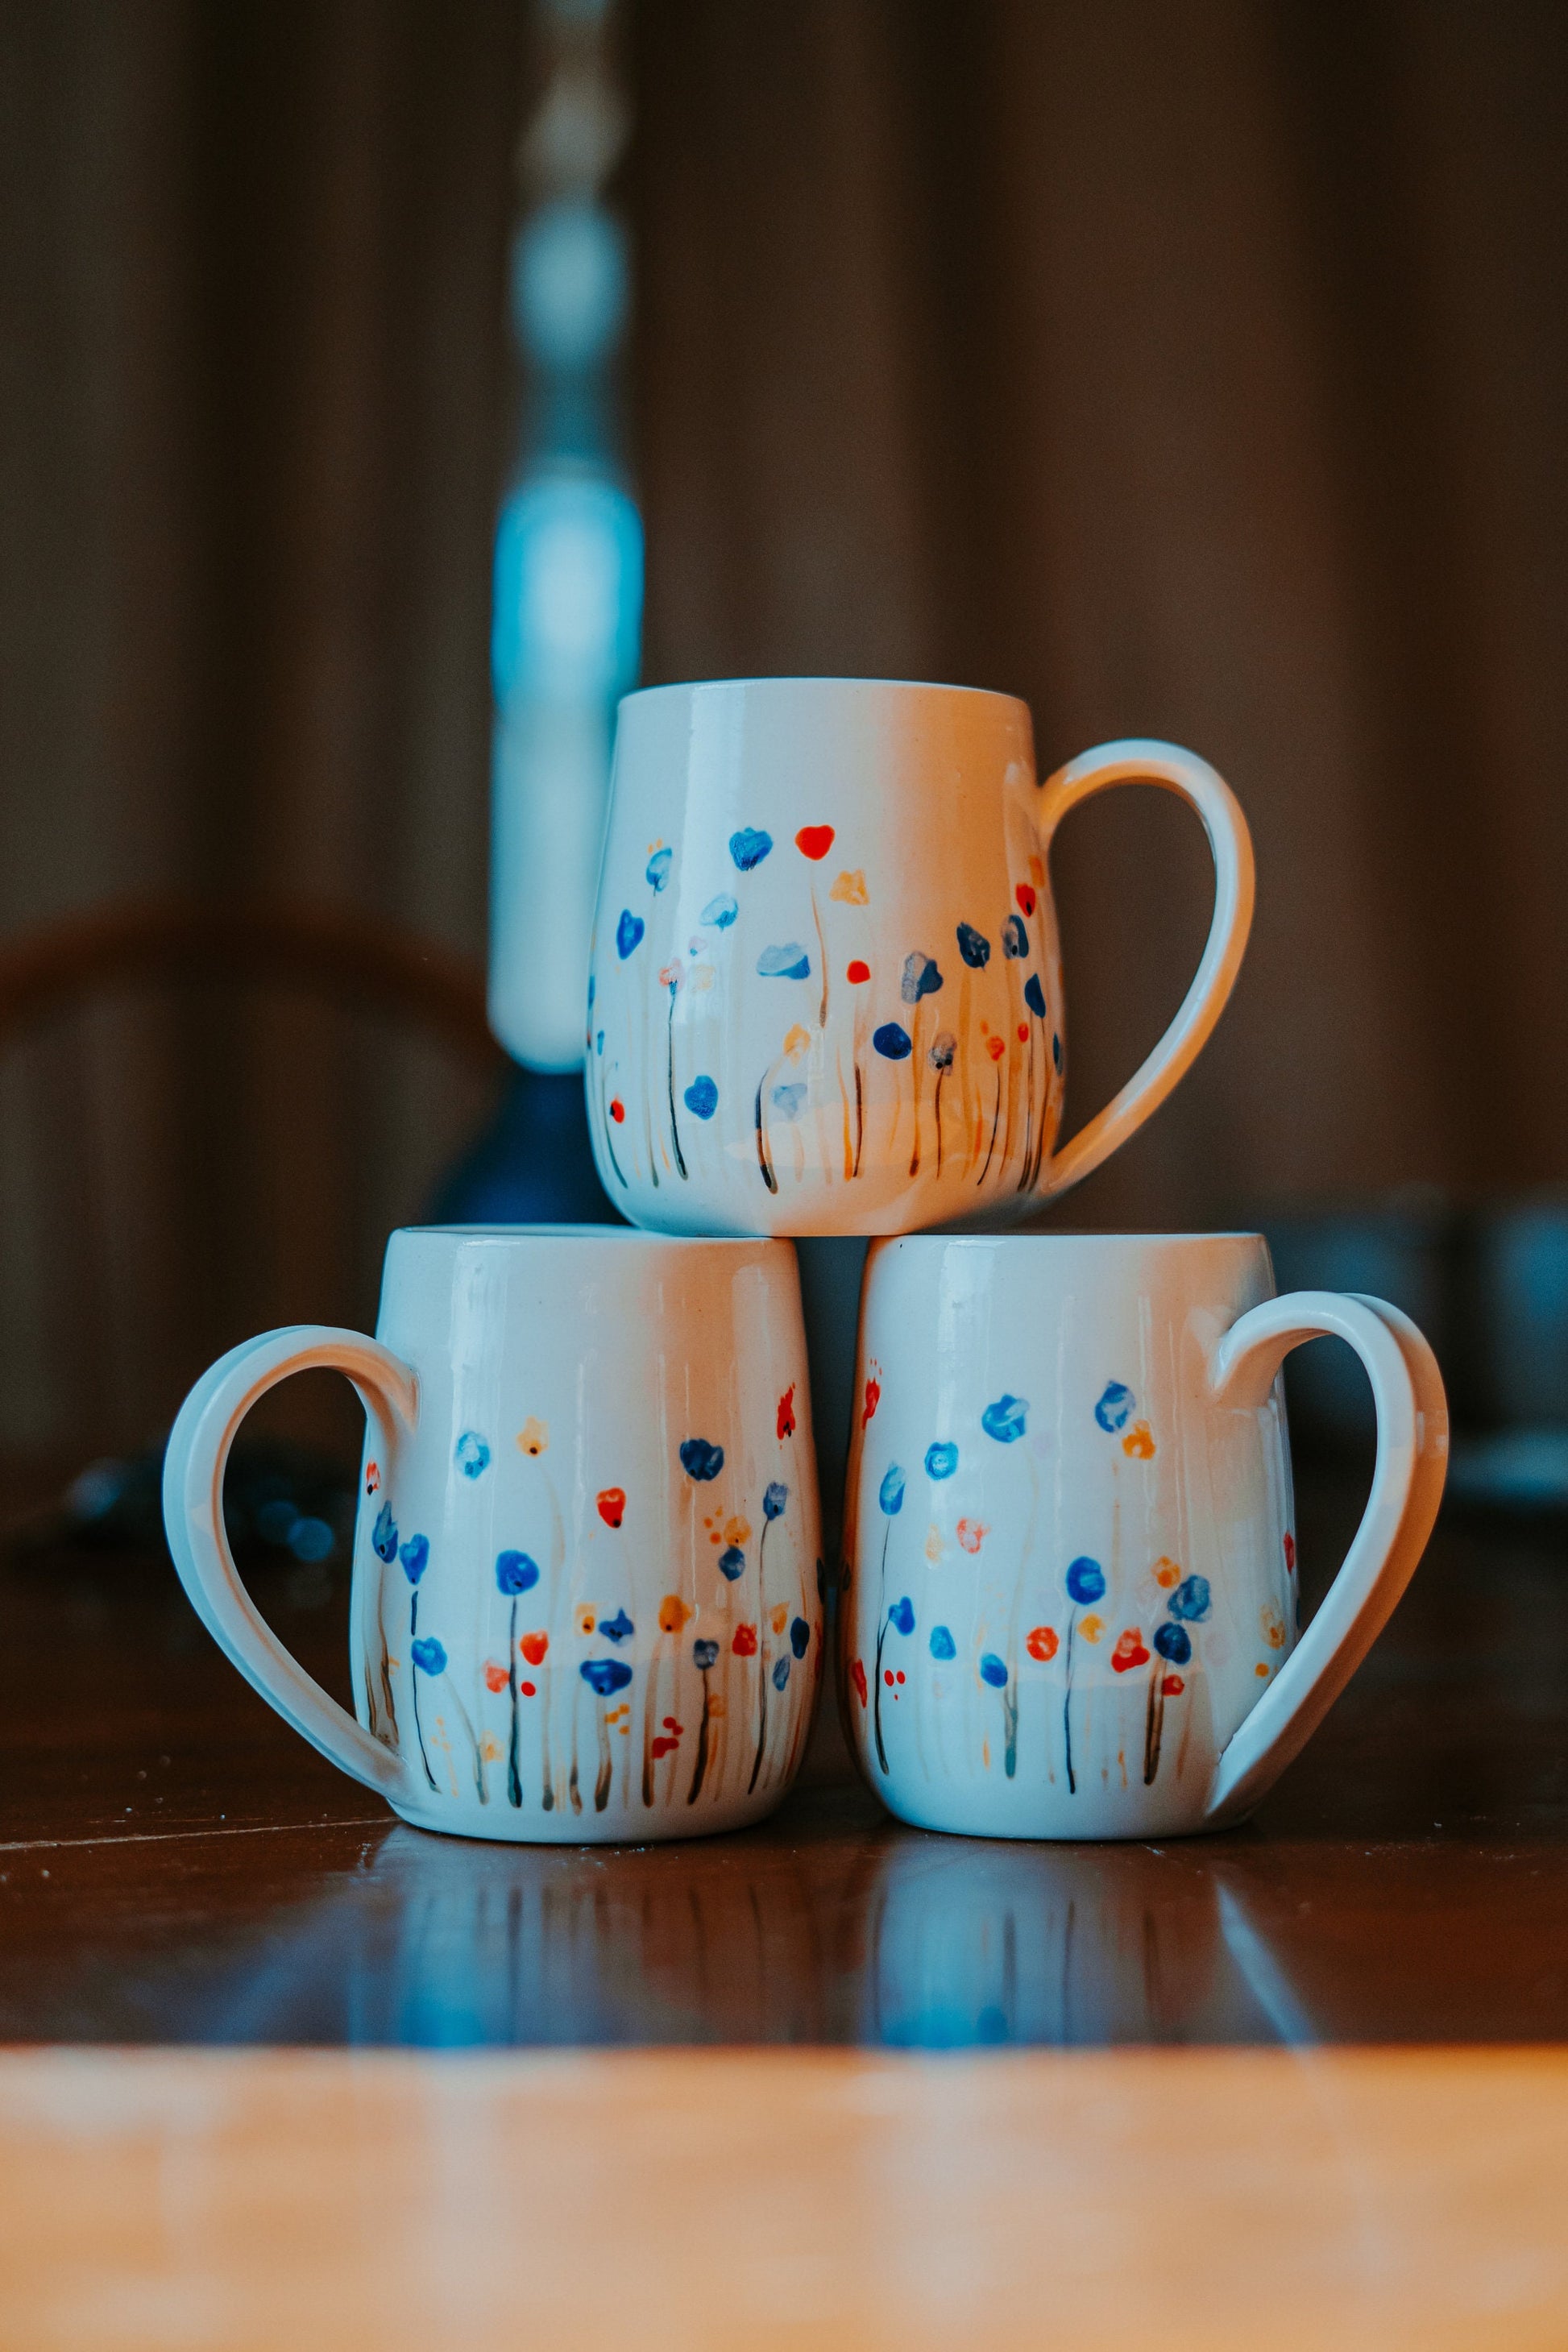 London pottery painting: make and paint your own ceramic mug